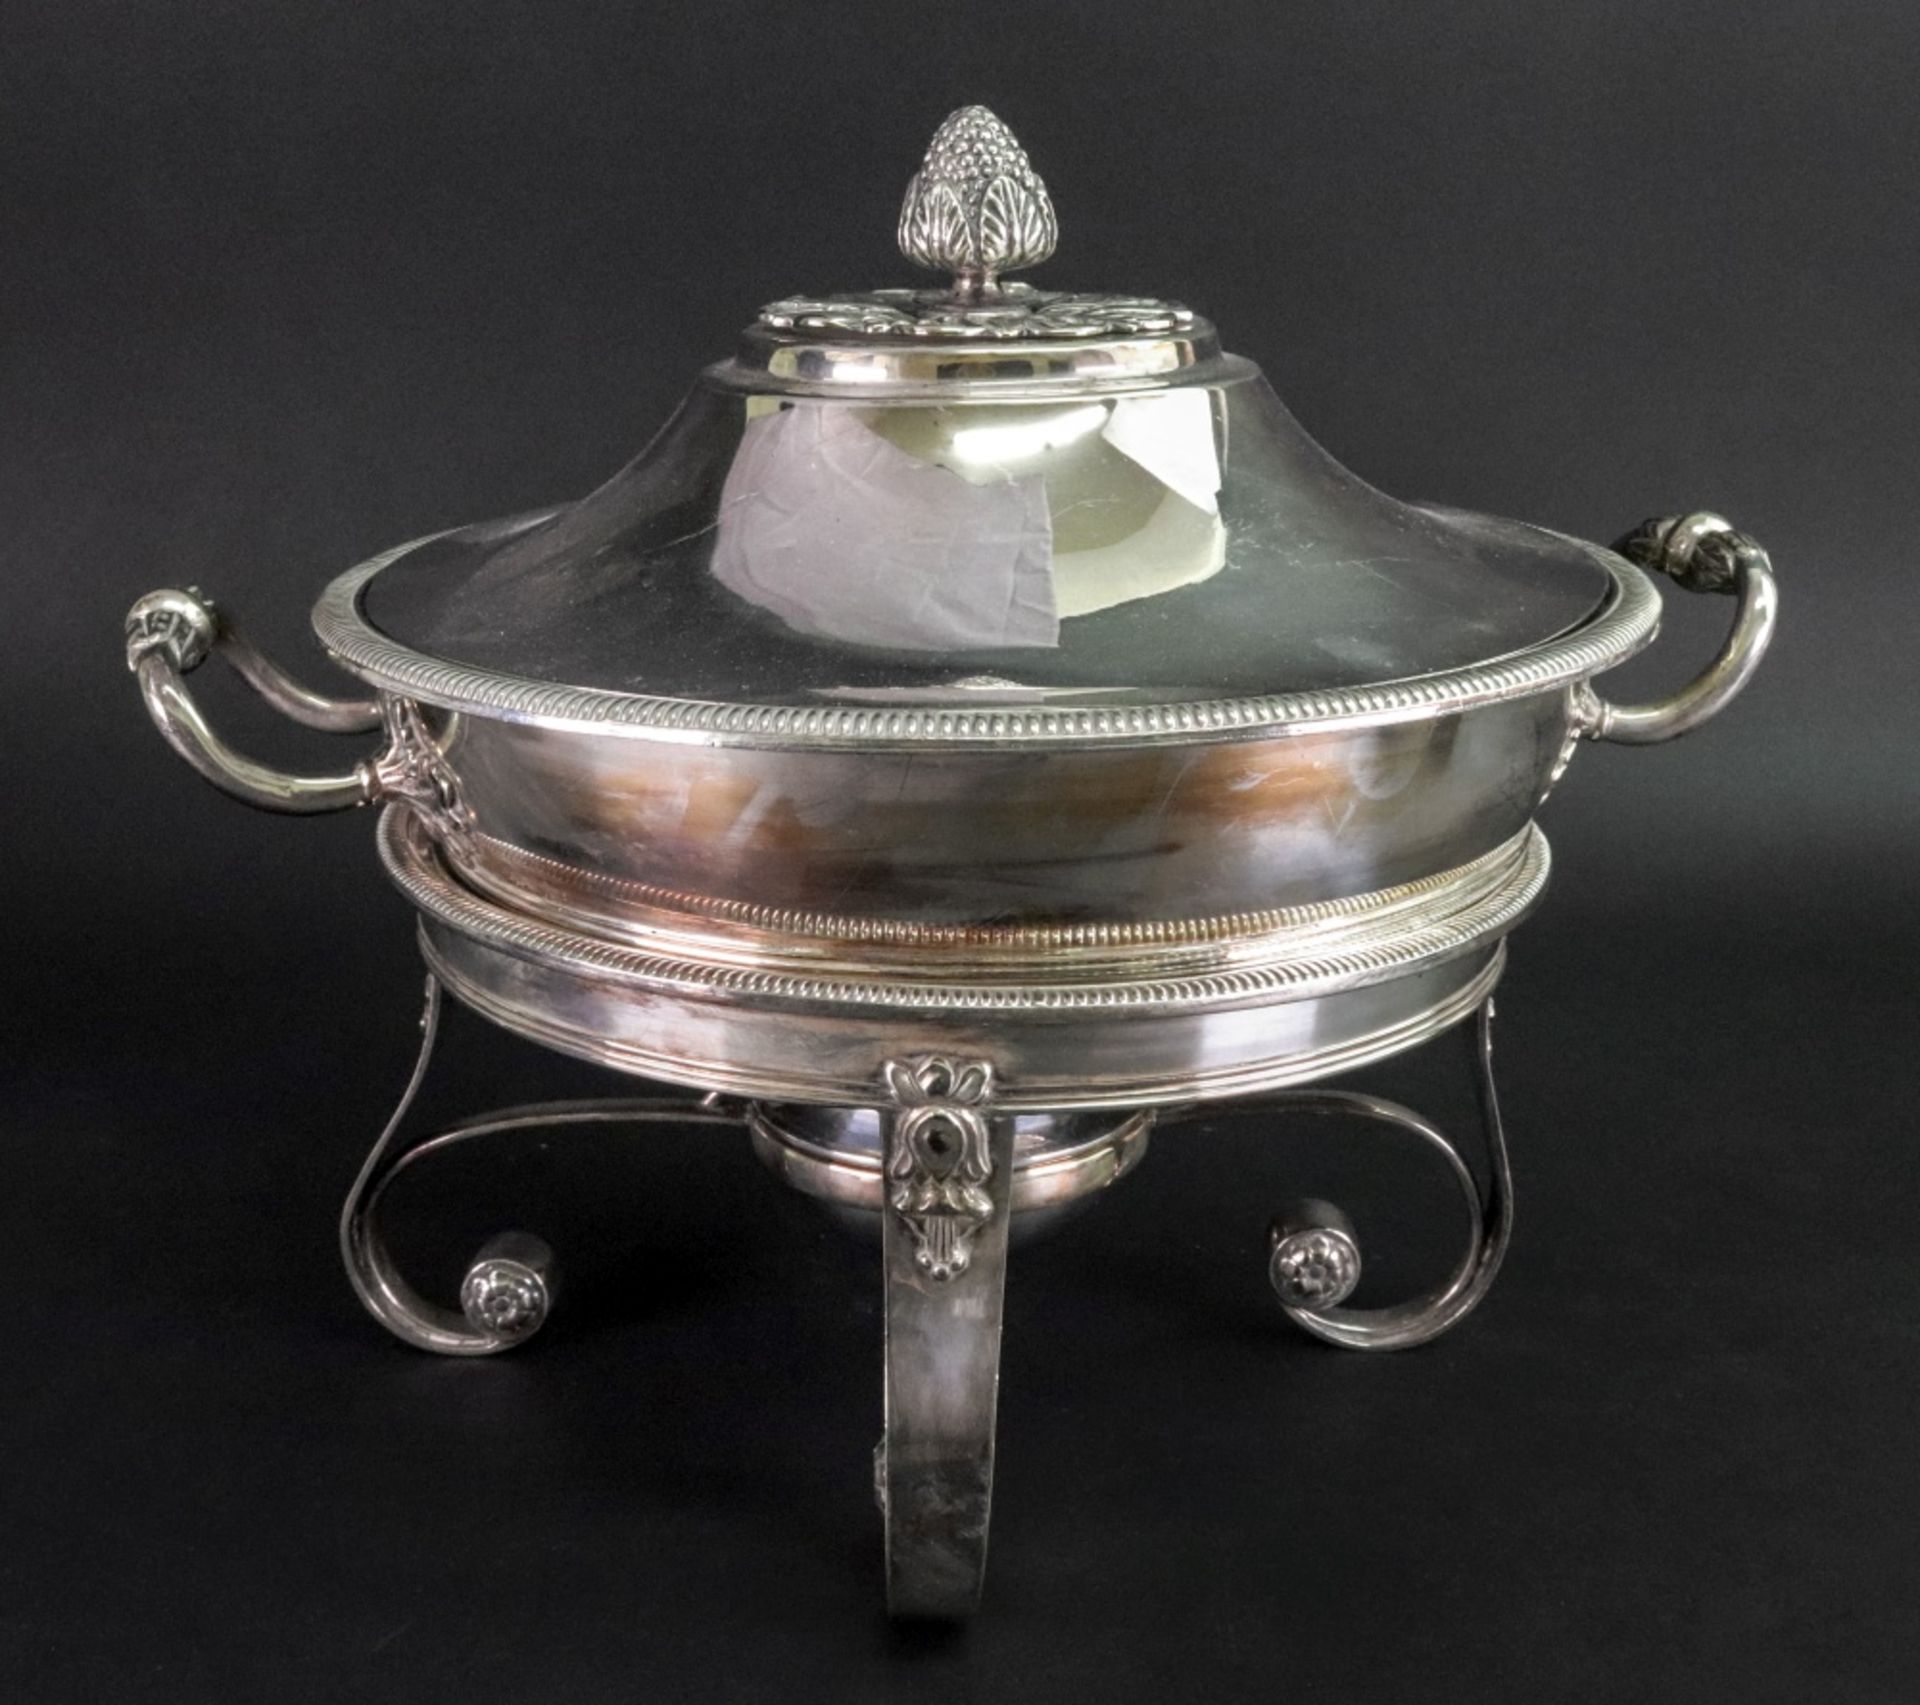 An Empire style electroplate circular entree dish on spirit heater stand, late 19th century,